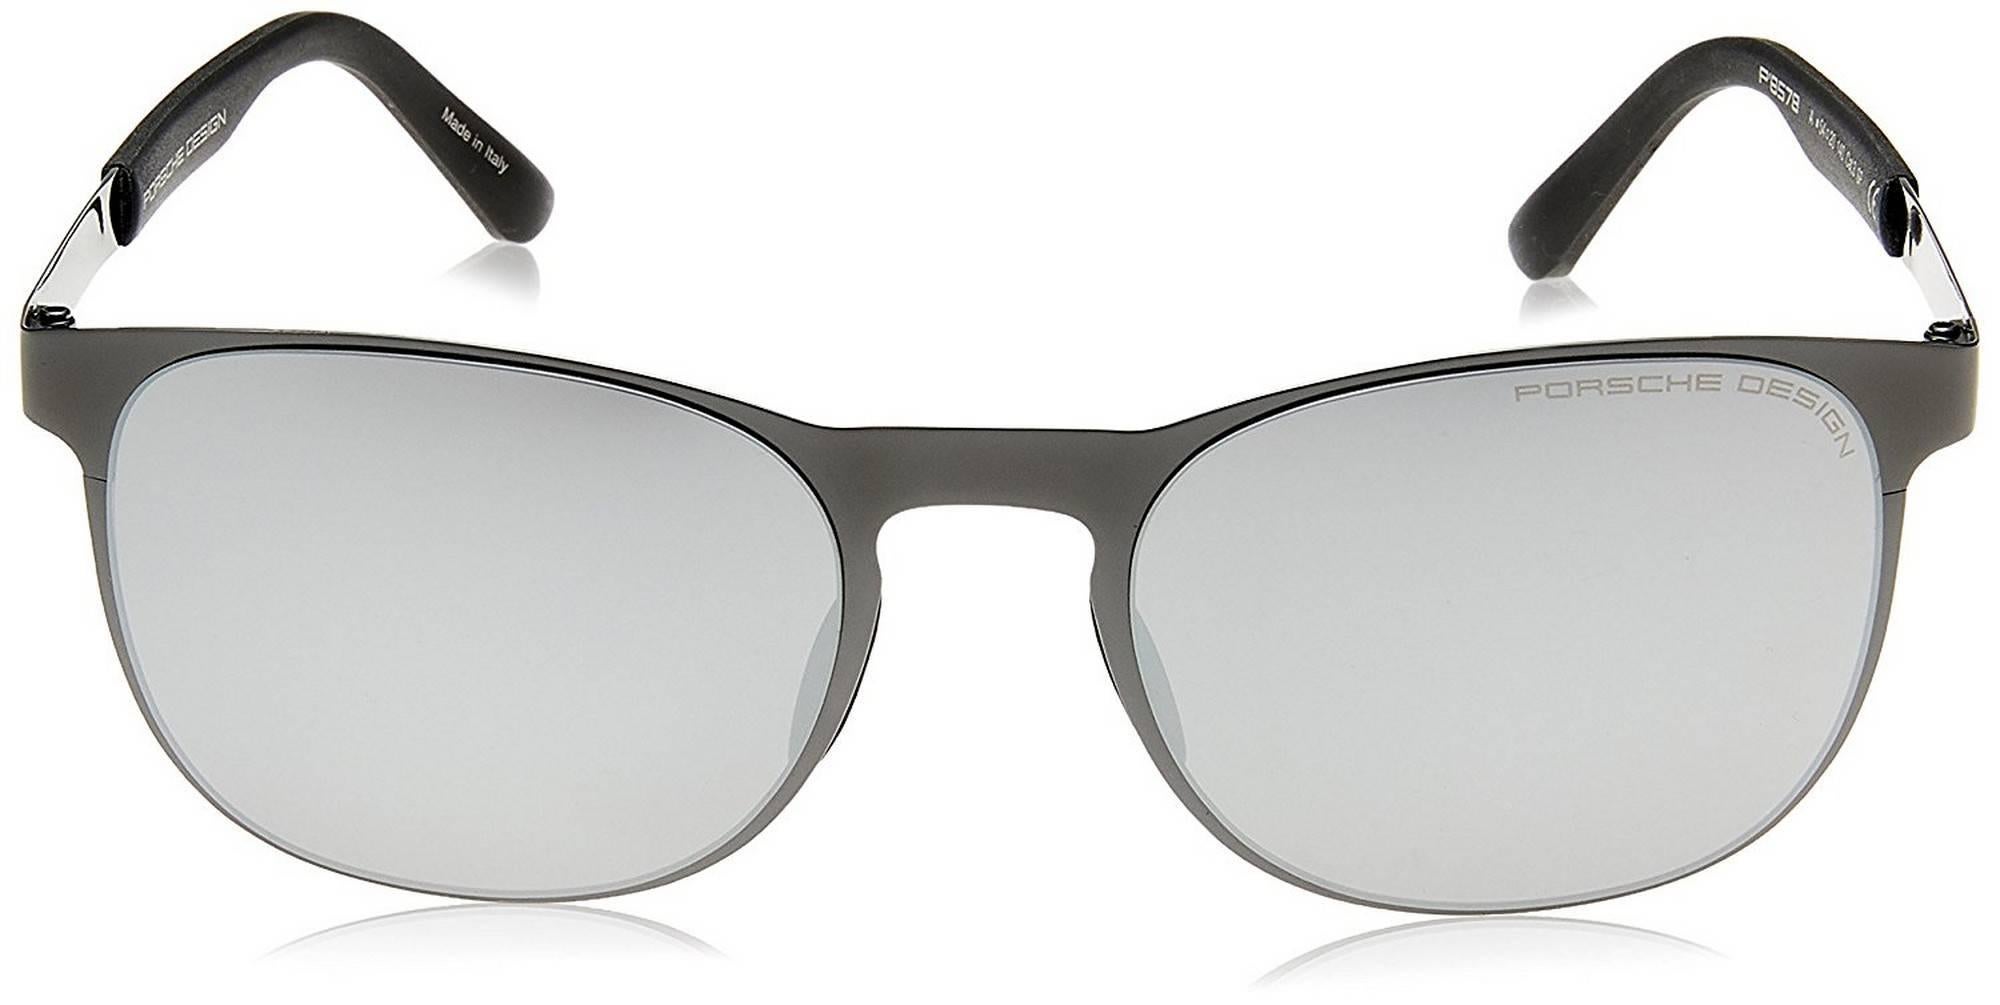 Porsche Design P8578-A-54 Mercury Silver Sunglasses

Frame: Metal
Brand new with original case and cleaning cloth.
Made in Italy